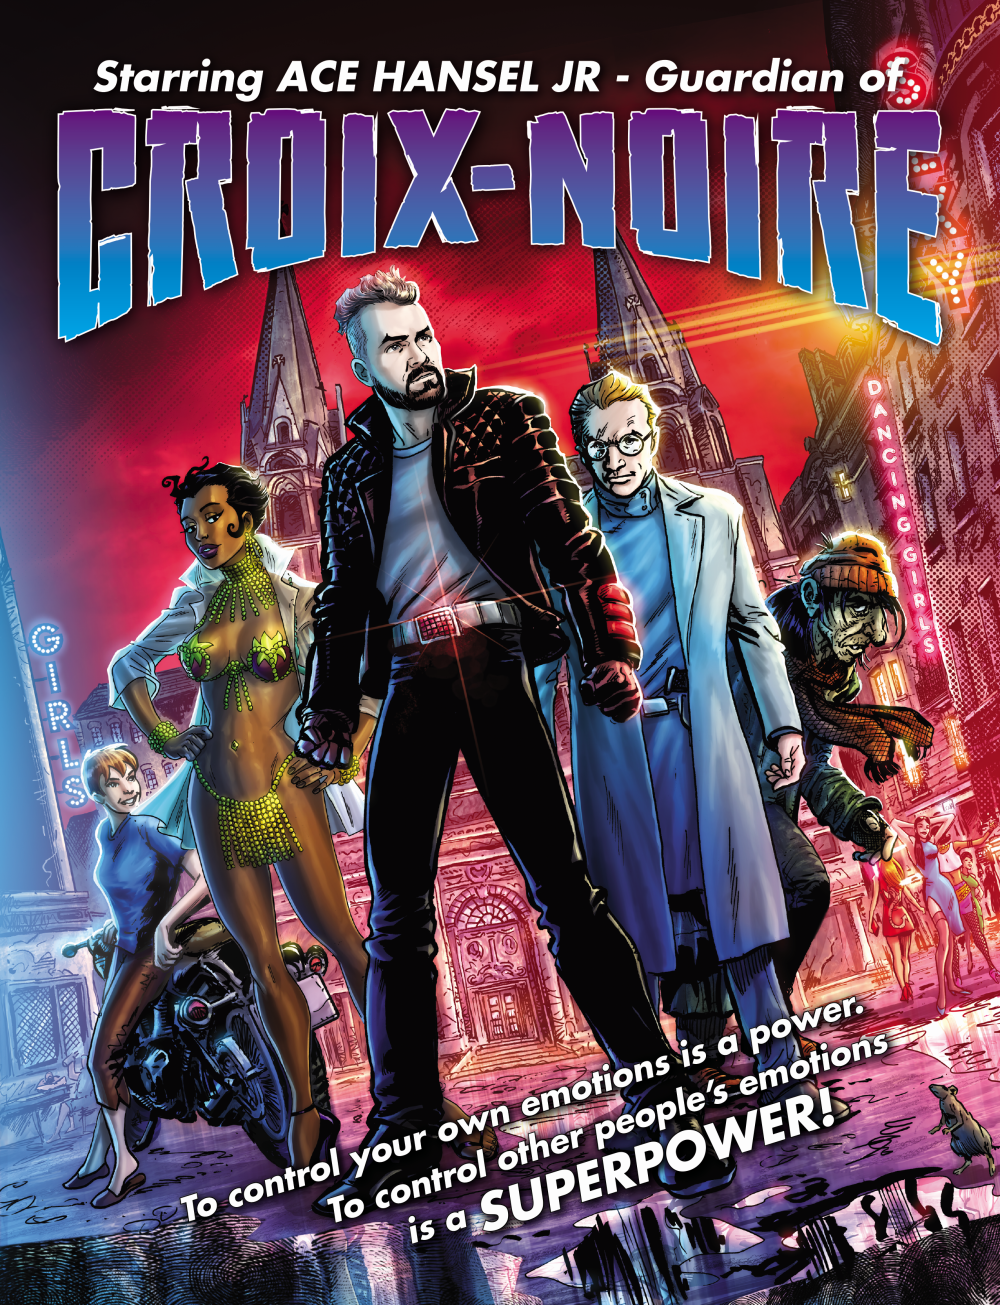 Croix-Noire - prepay - all seven issues (sent on release)!